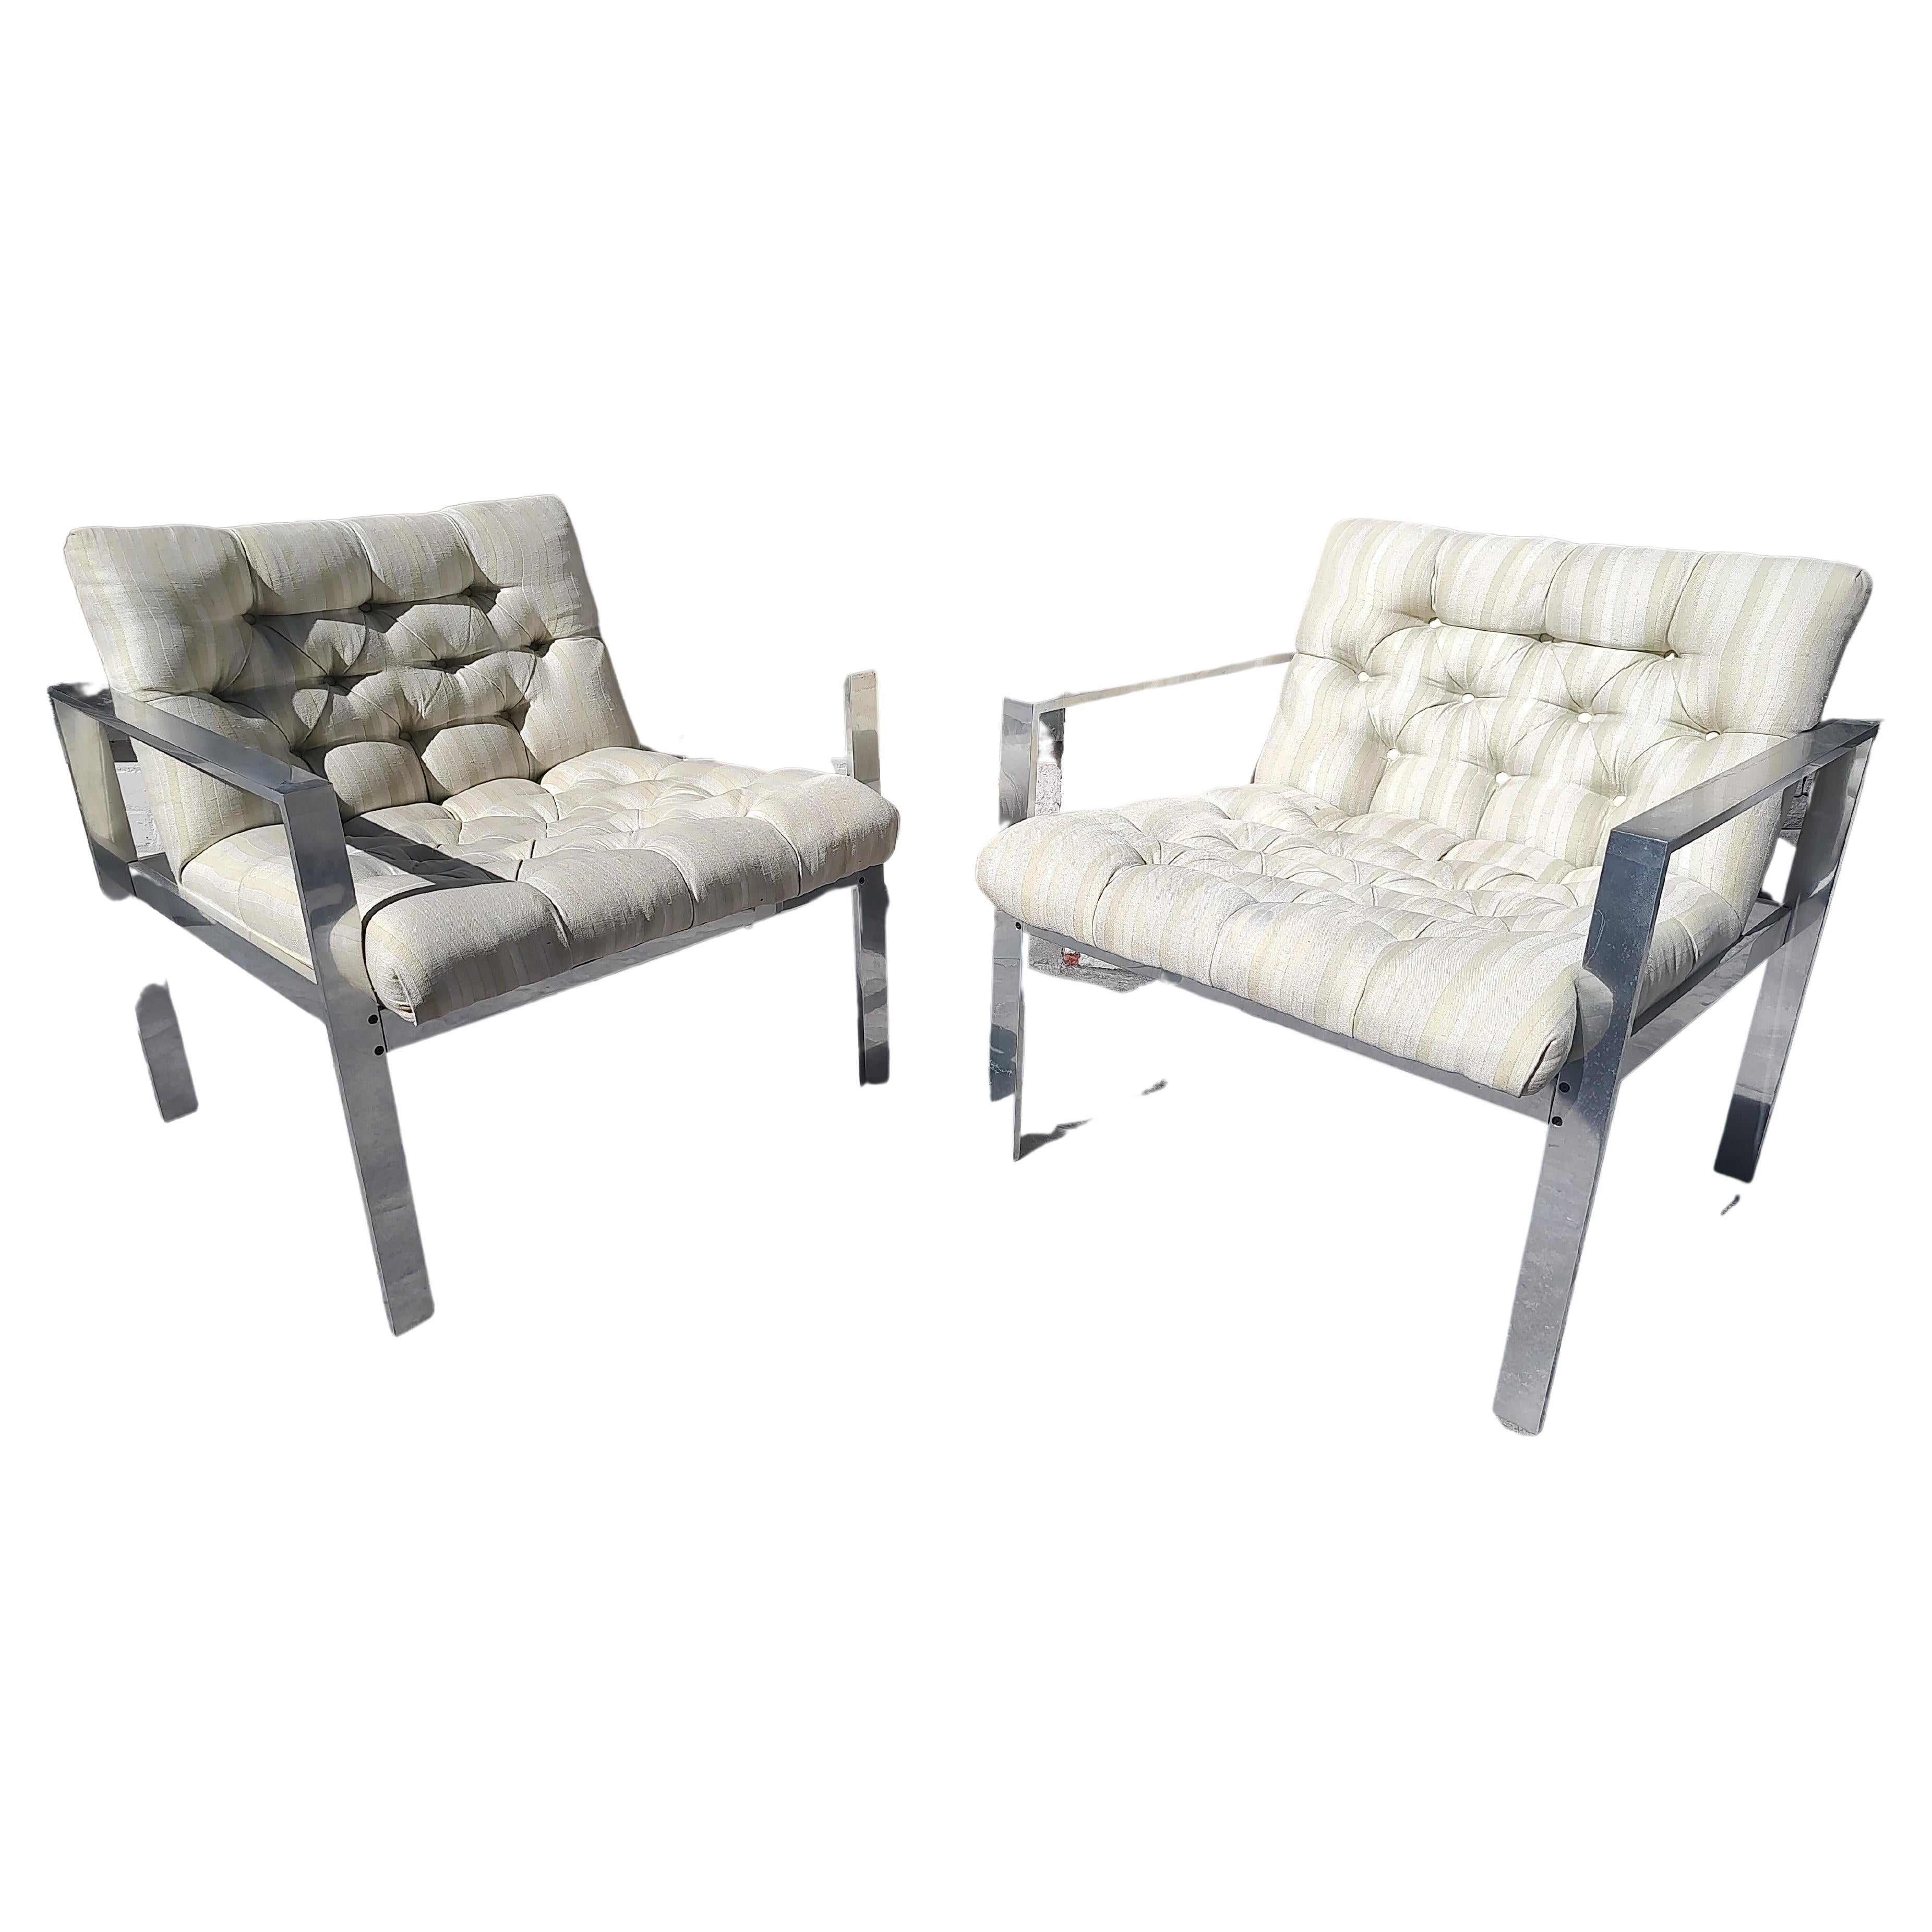 Pair of Mid-Century Modern Tufted Aluminum Lounge Chairs by Harvey Probber For Sale